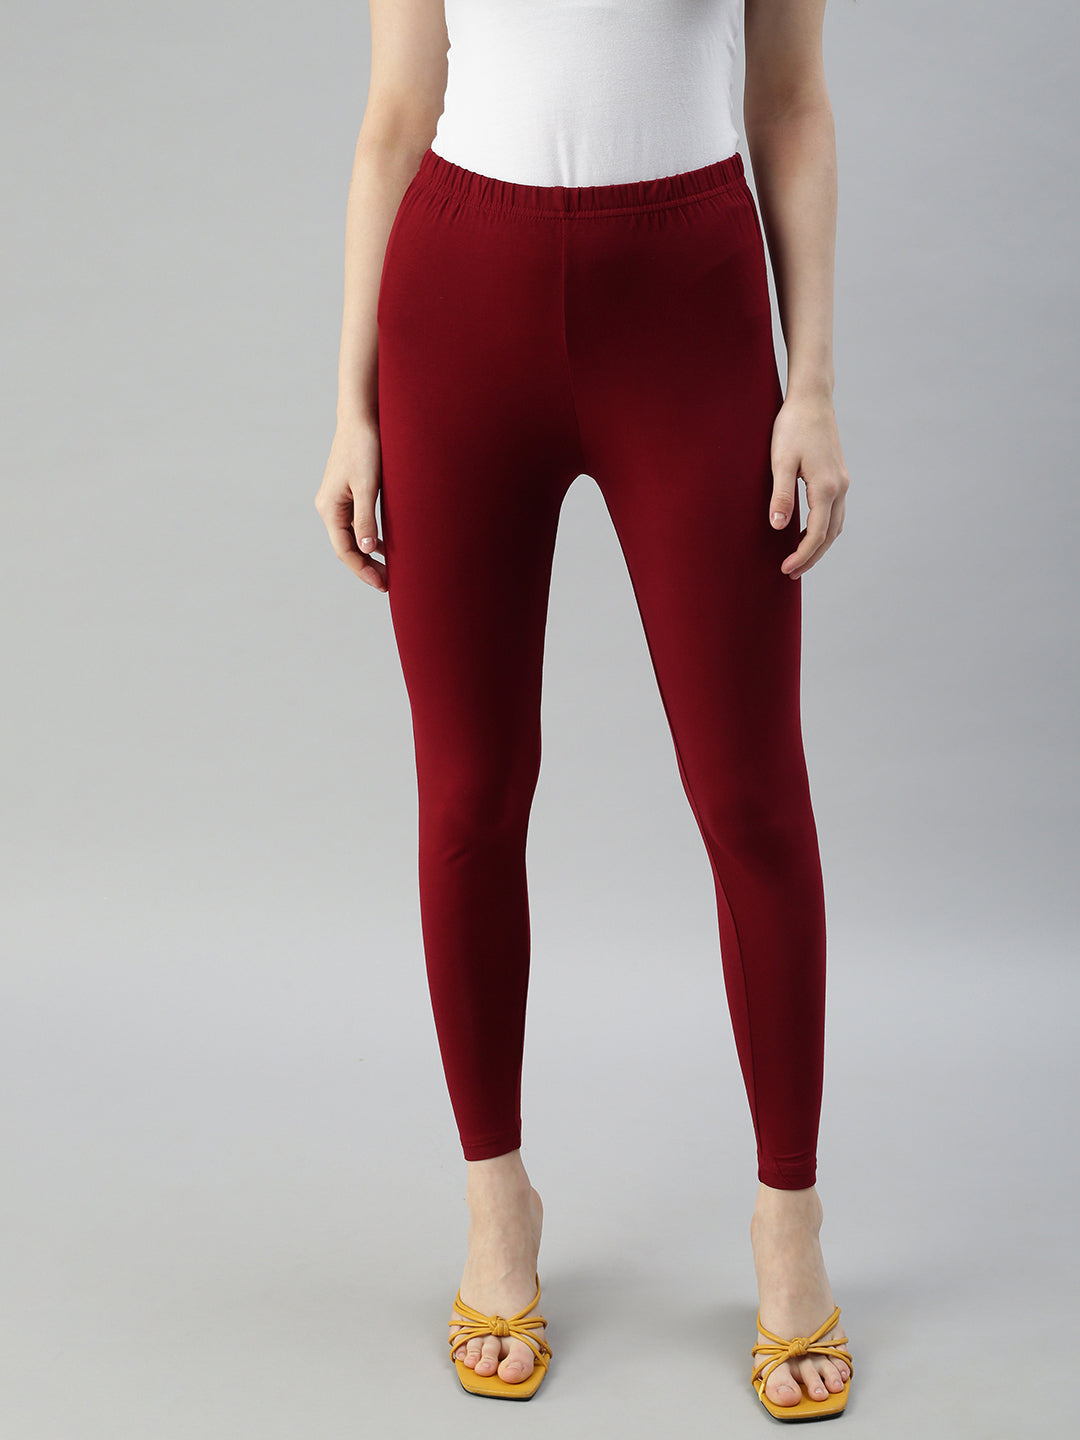 Pranjal Premium 4 way Stretchable Ankle Length Leggings, Stretch Fit, Maroon